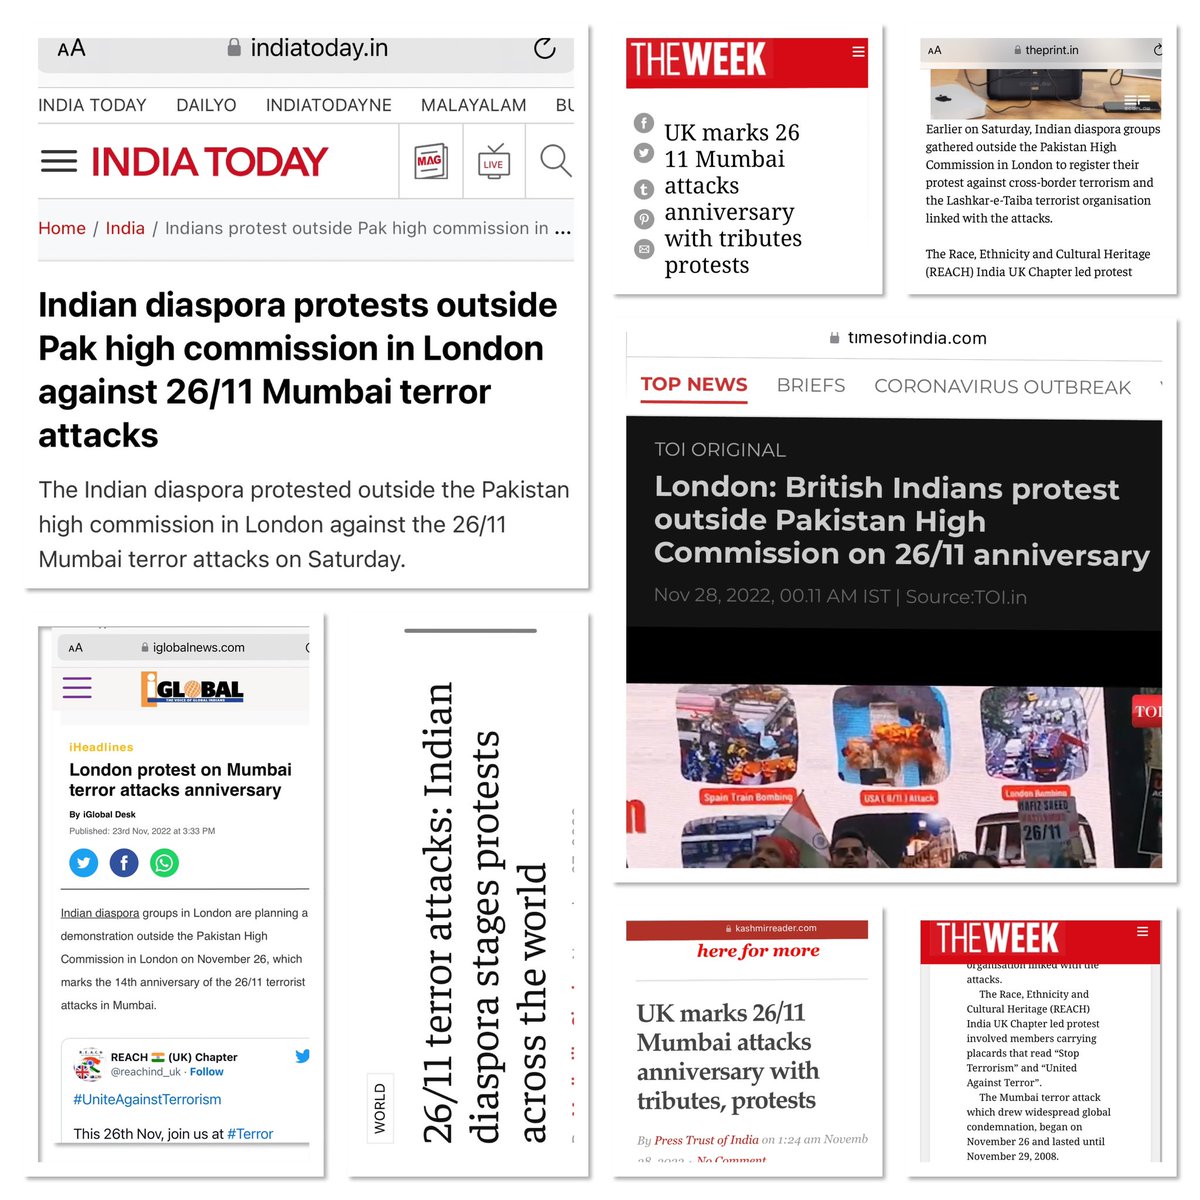 Impact of 26/11 protest against Pakistan in U.K

We will never forget, never forgive 2008 #MumbaiTerrorAttack 

United #Bharat 🇮🇳🙏

Thanks all for presence & media for coverage

Links to all article below

@HCI_London @DrSJaishankar @RDXThinksThat @MEAIndia @arifaajakia @AmyMek